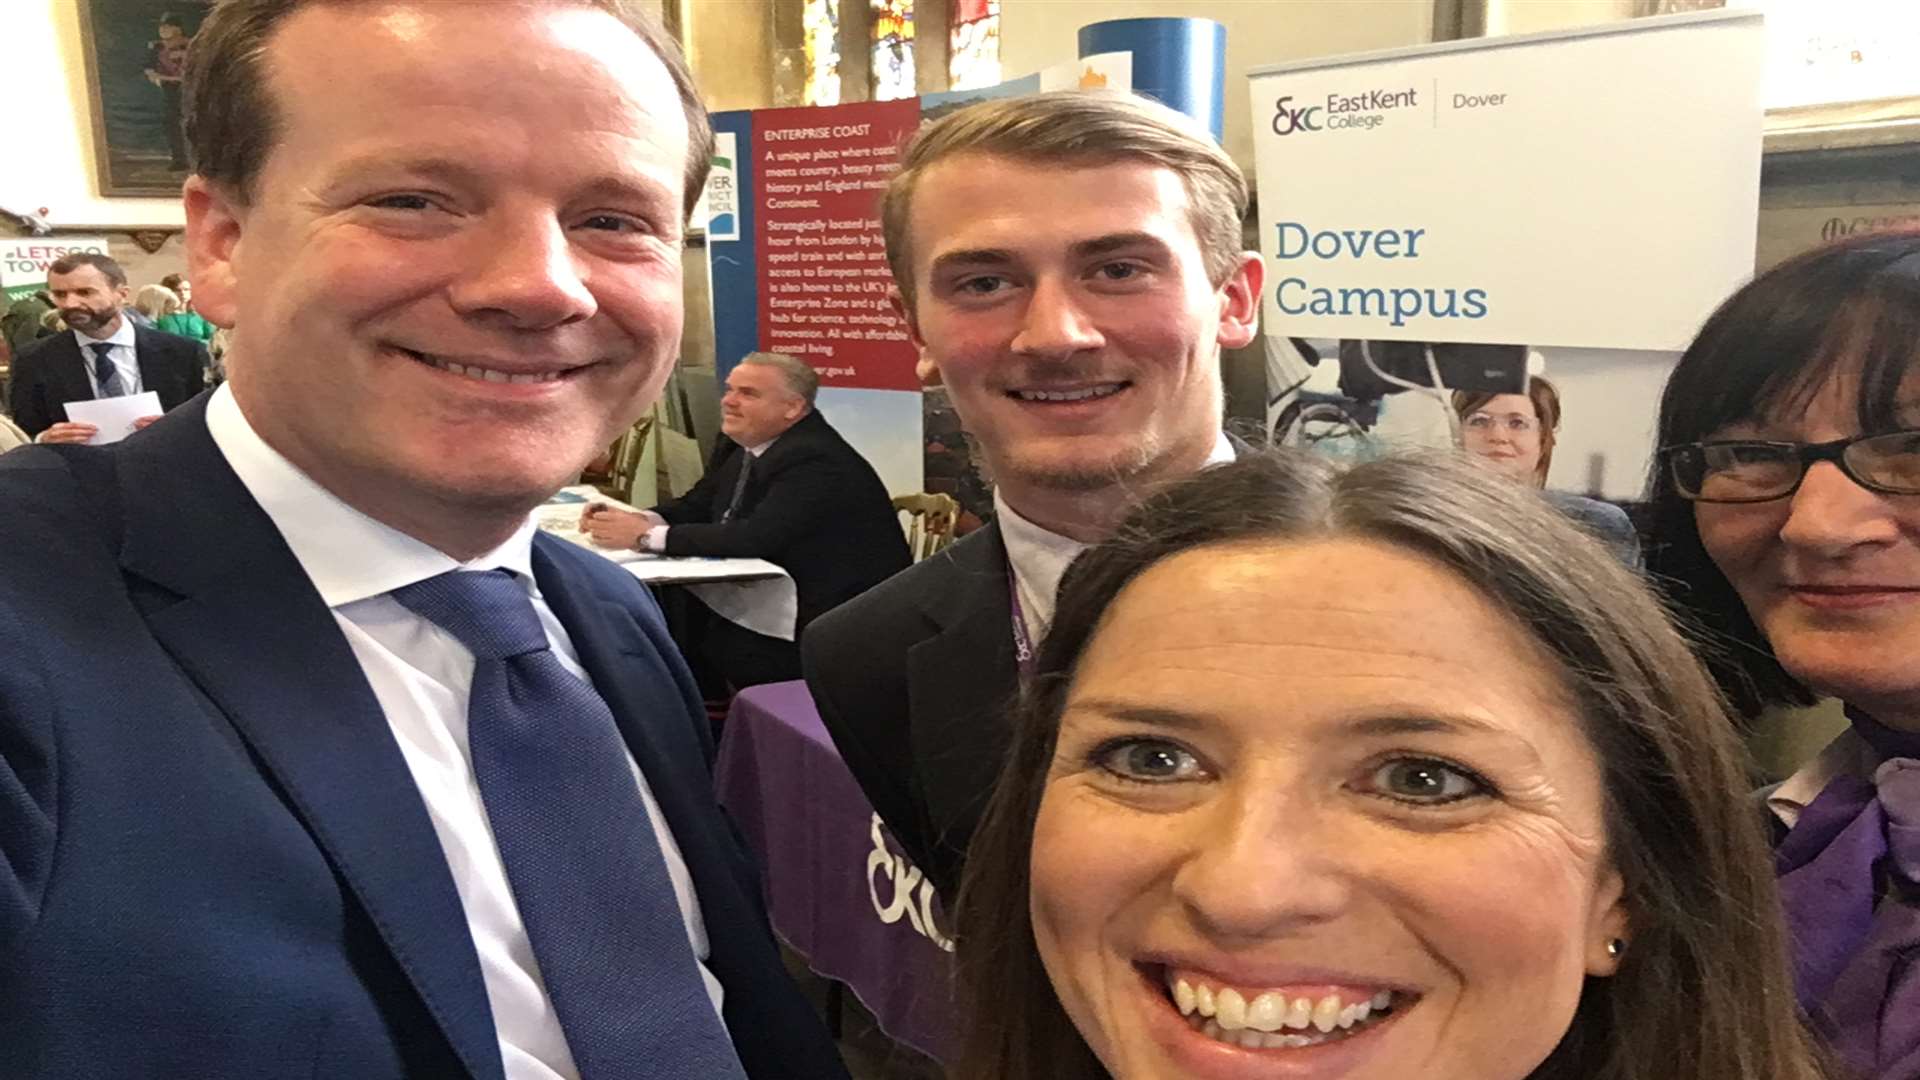 Dover MP Charlie Elphicke takes a group selfie, with members of East Kent College